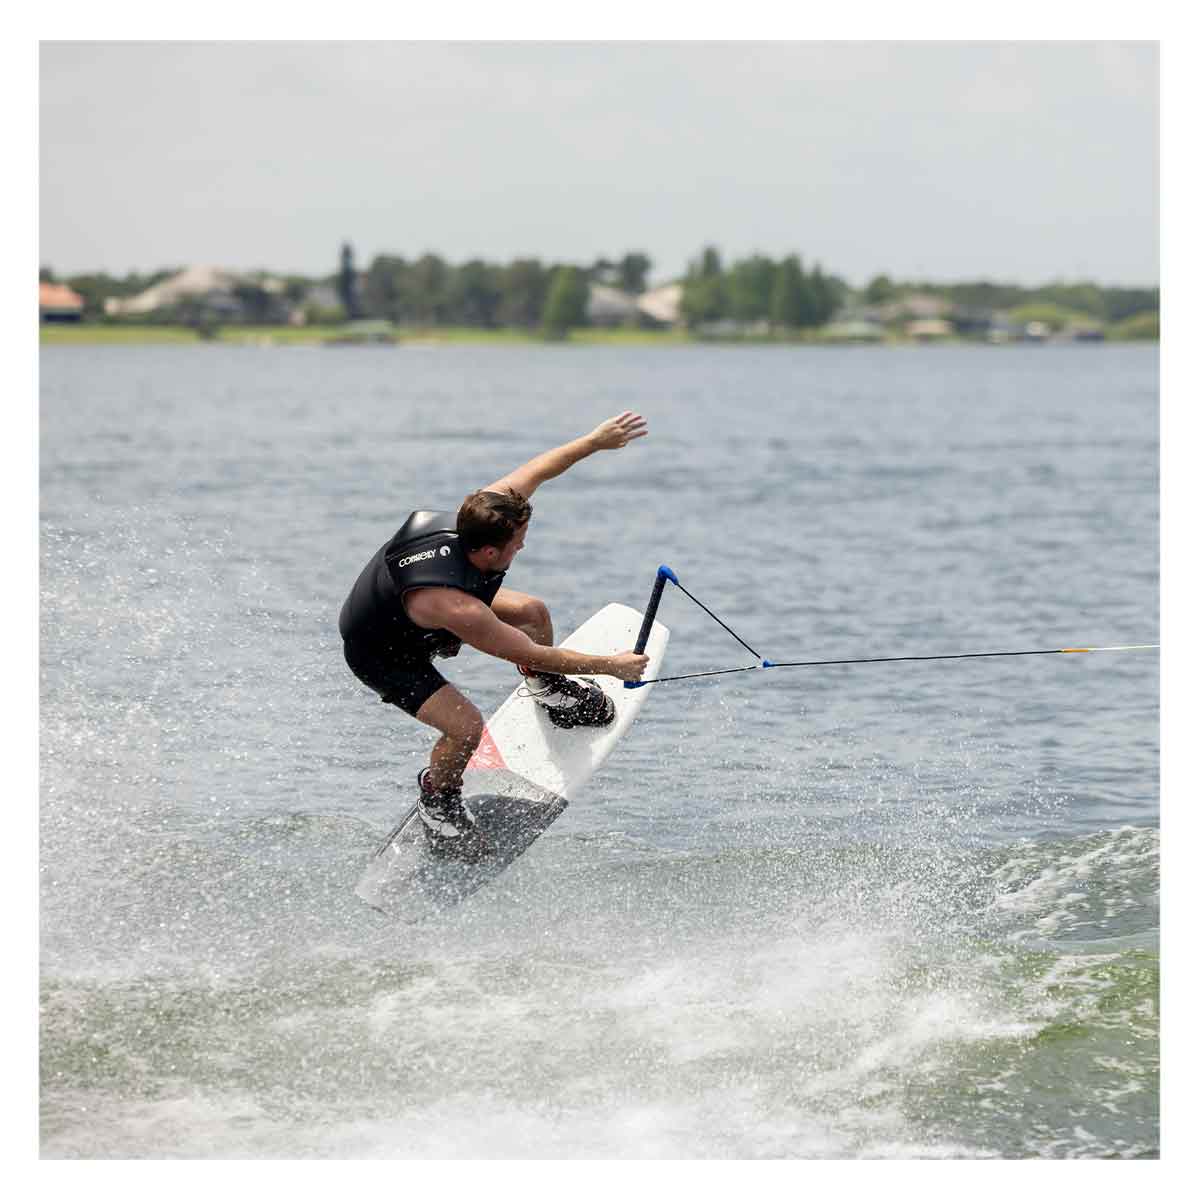 Connelly Pure Wakeboard w/ Venza Bindings